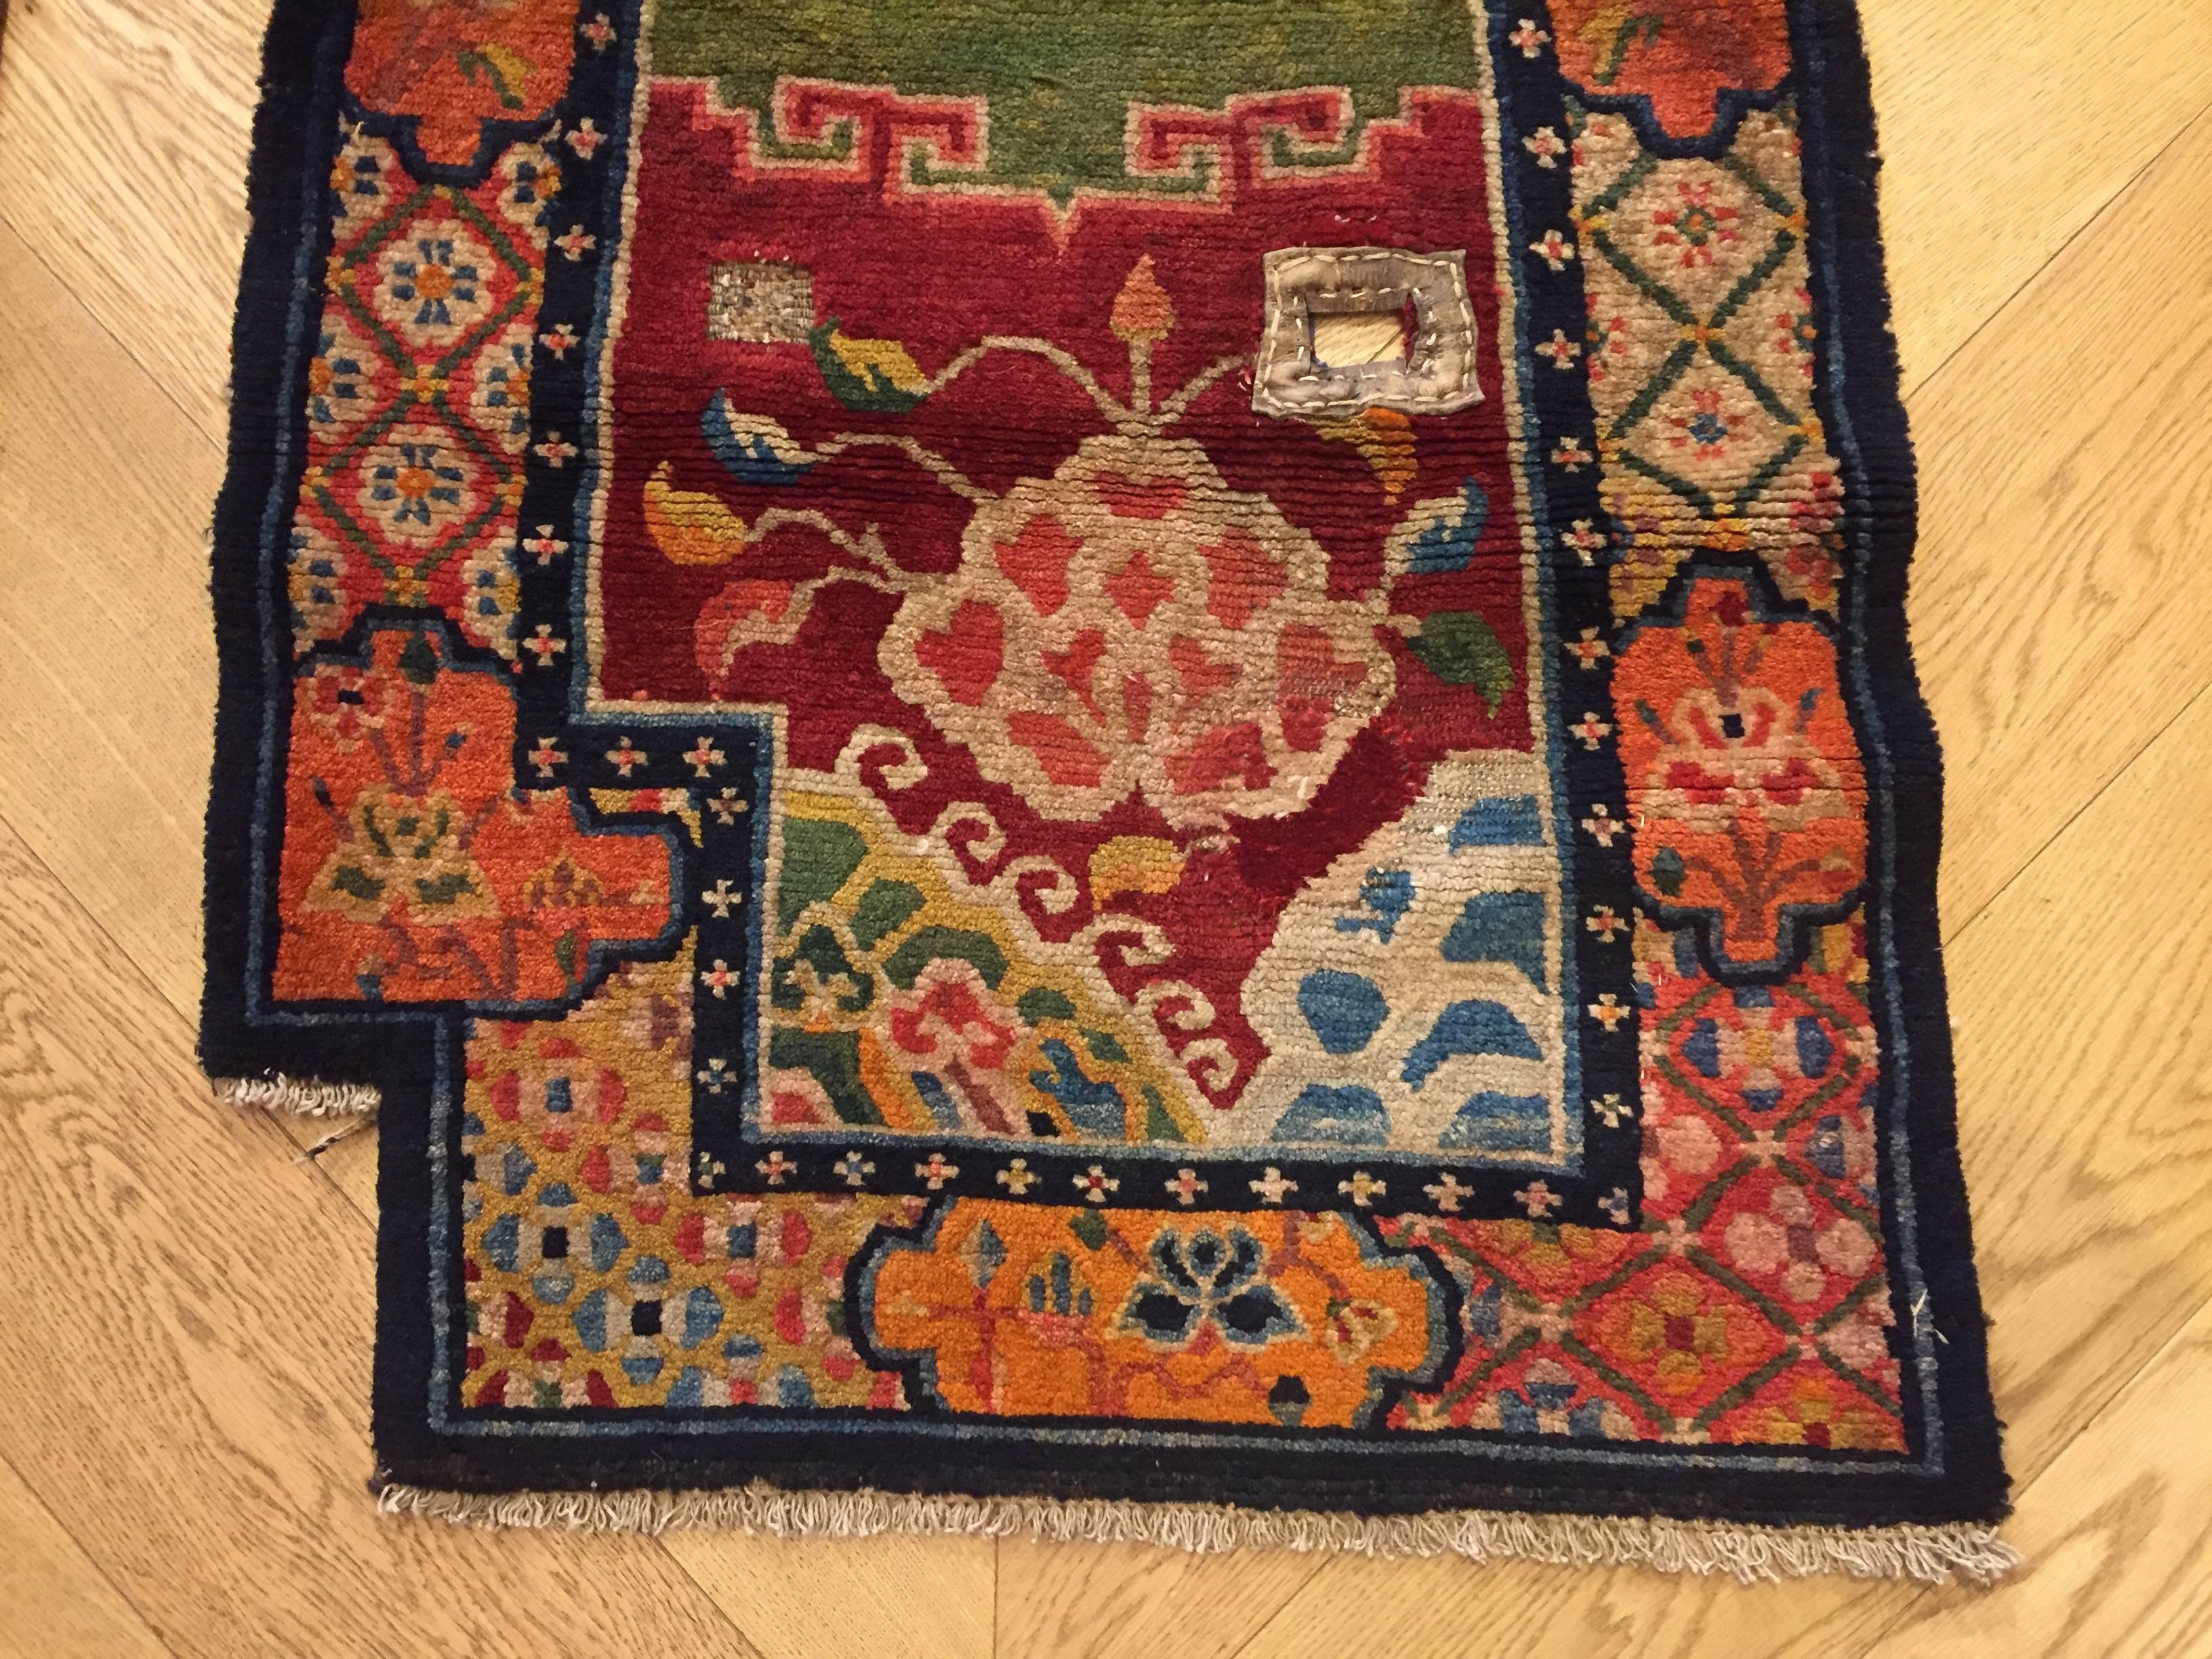 A particular type of carpet made in Tibet with Tibetan typical technique. The Tibetan knot has a completely different structure compared to the other knots. The knot is in fact executed by placing a temporary shaft in front of the warp along the